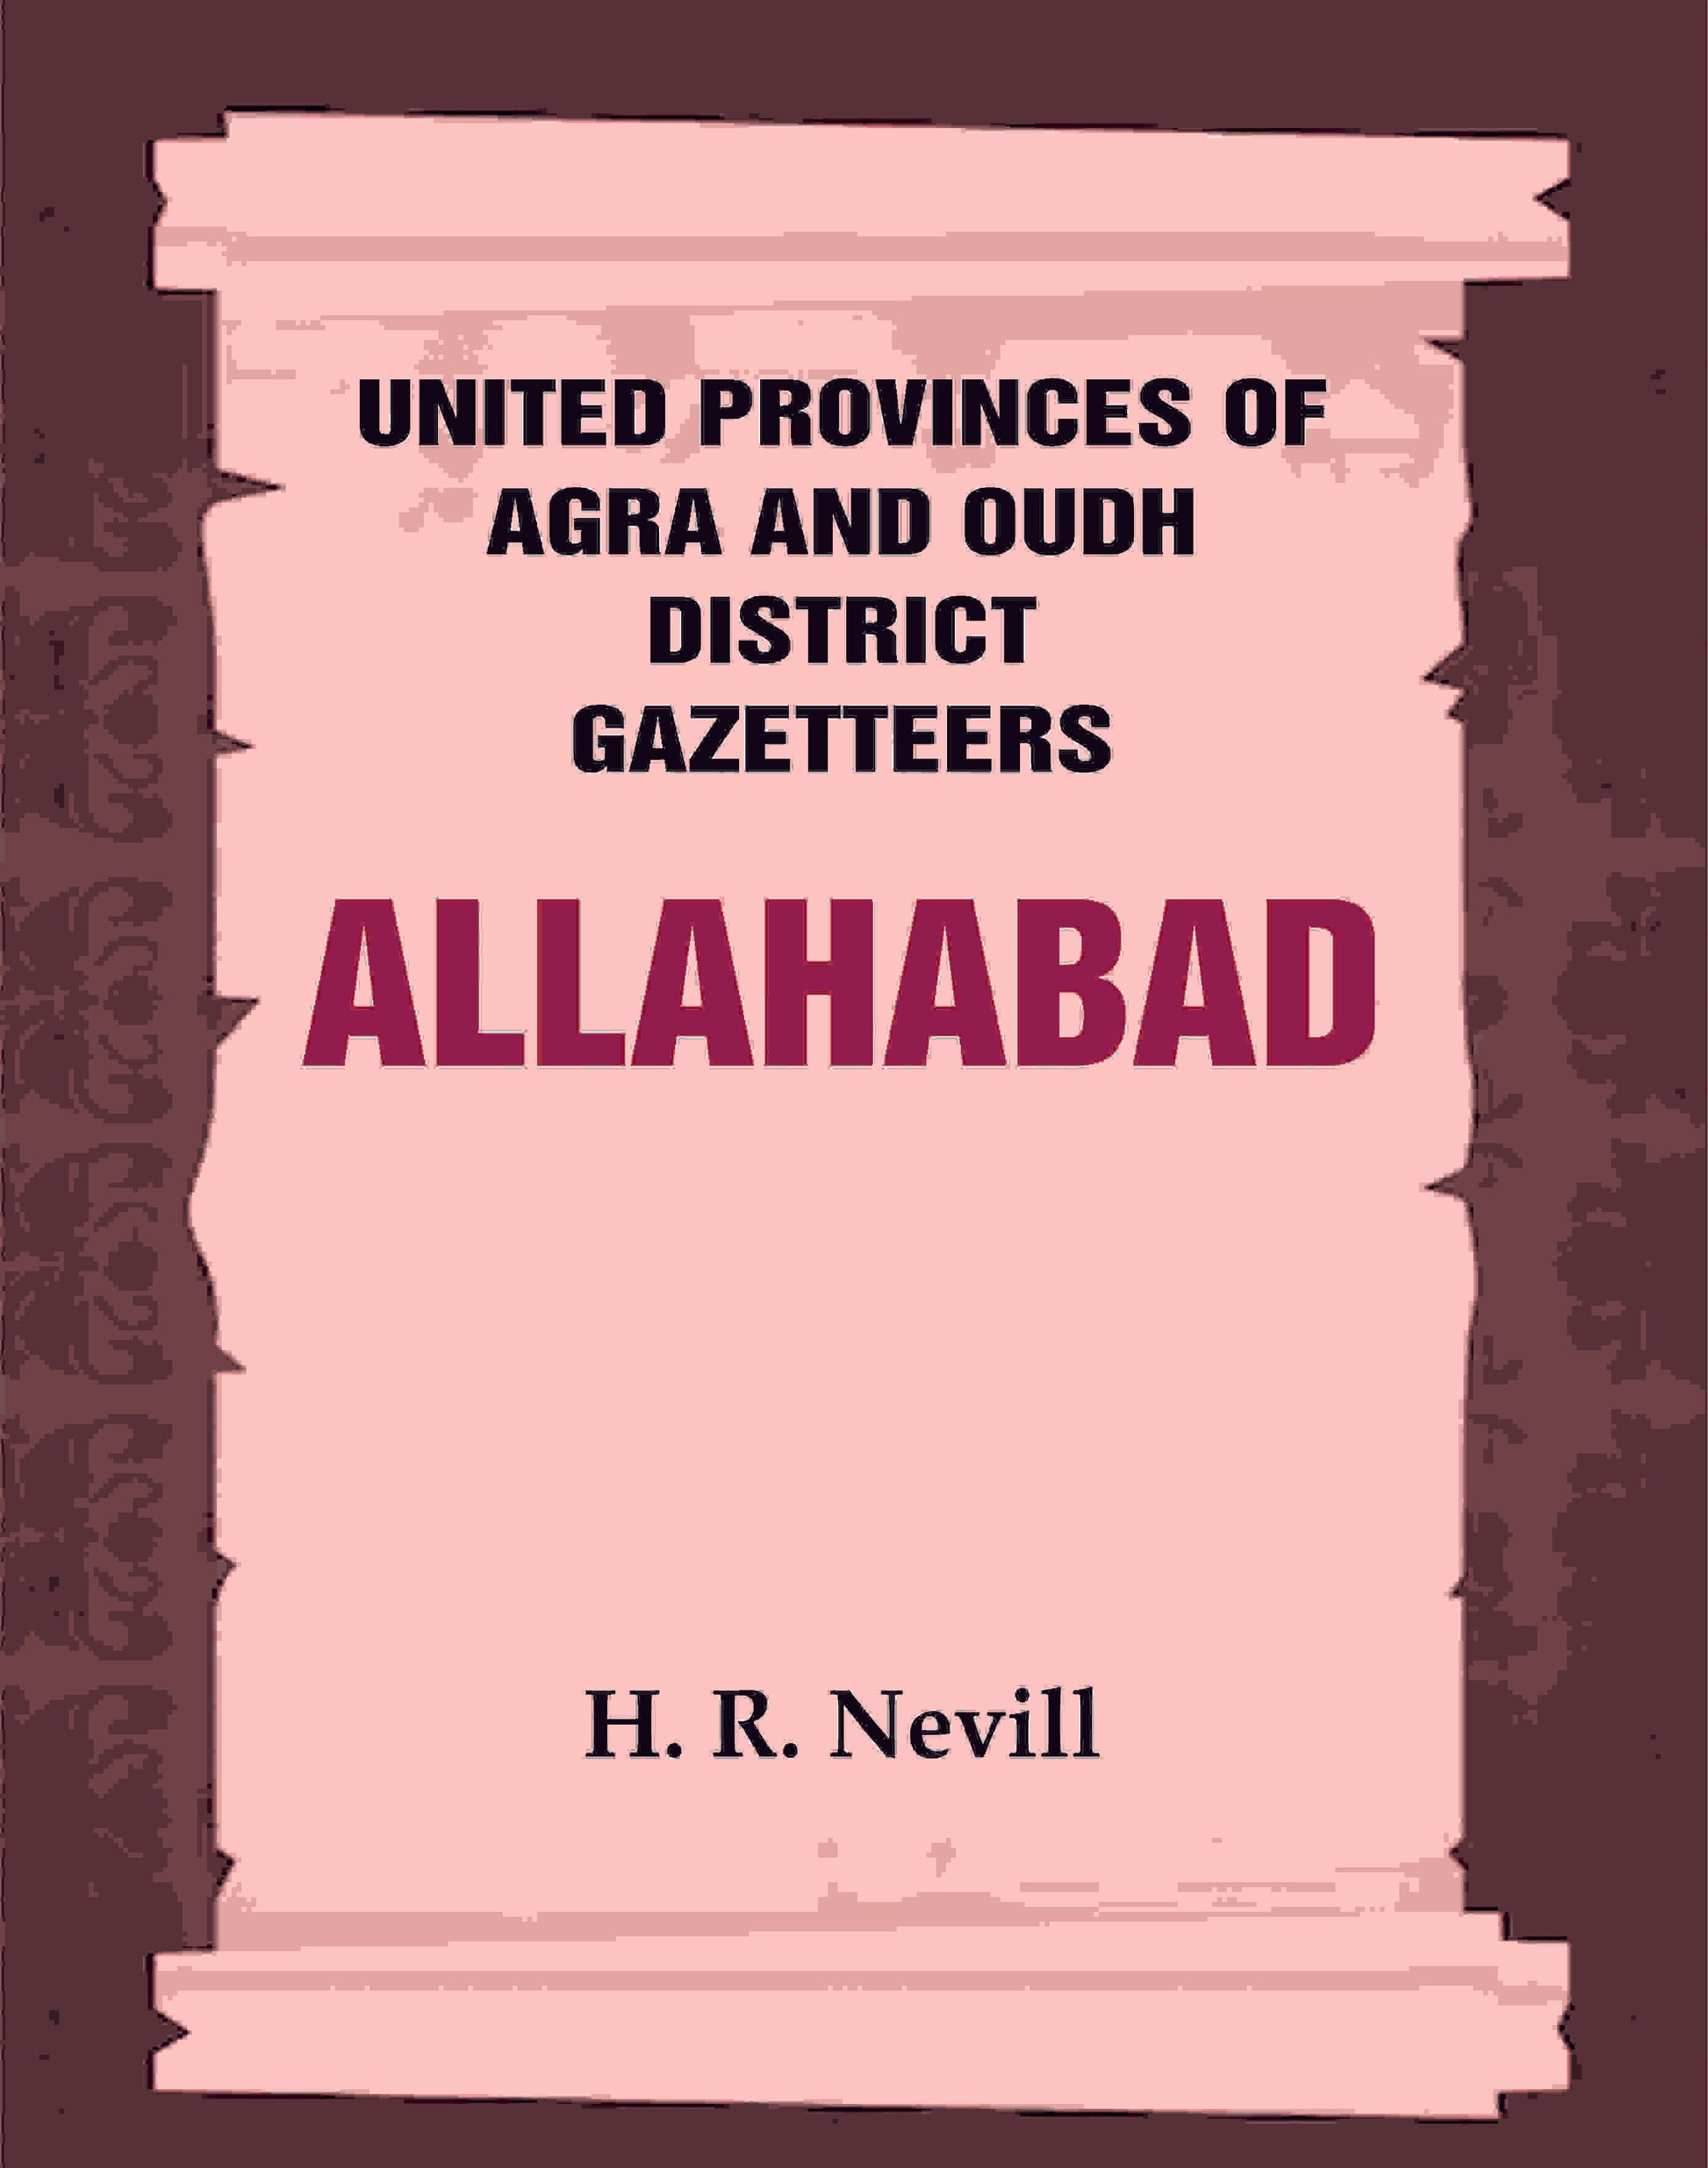 United Provinces of Agra and Oudh District Gazetteers: Allahabad